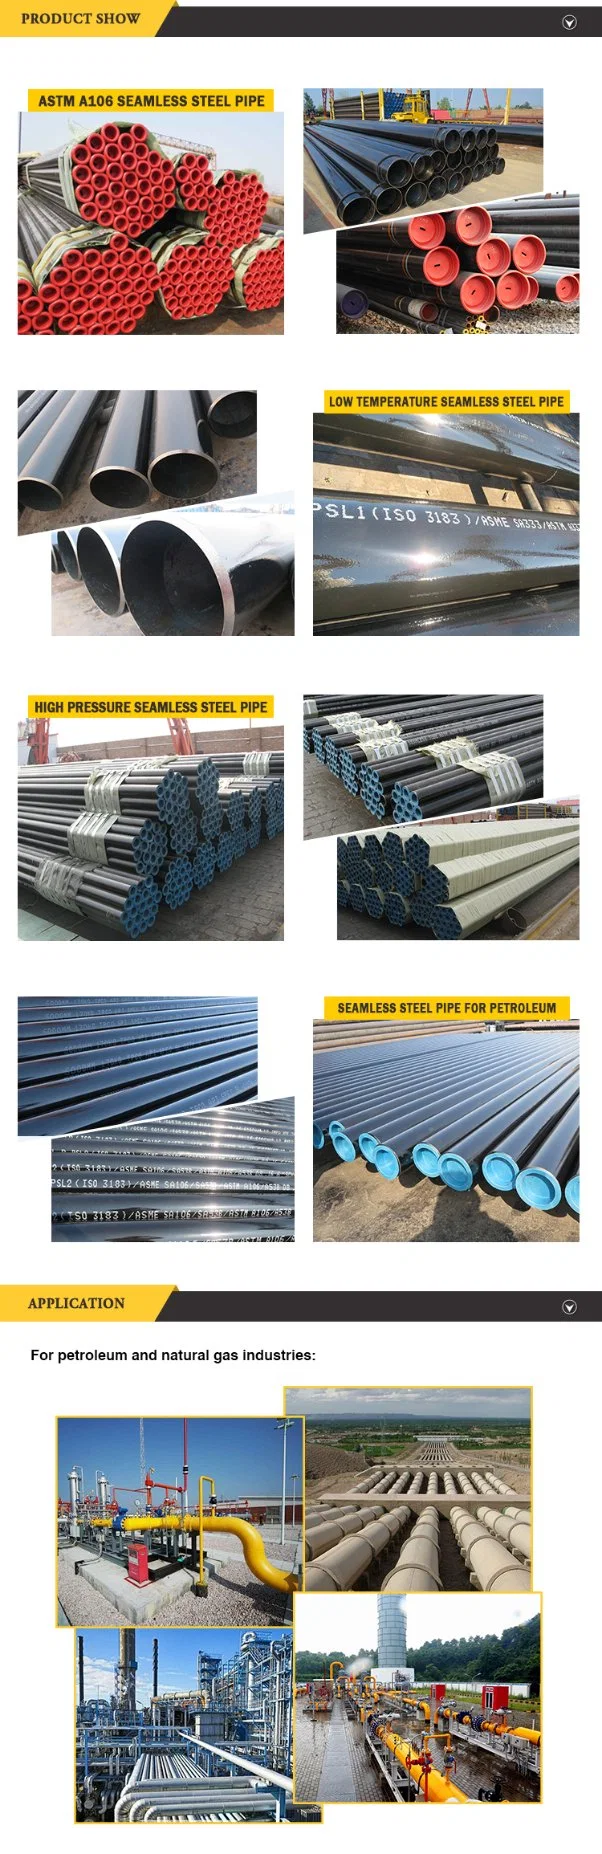 API 5L Psl1/ Psl2 Seamless Carbon Steel Pipe (Black SMLS TUBE for Oil and Gas Pipeline) Grade B X42 X52, X60, X65, X70, X80 Sch40 Schxs Std China